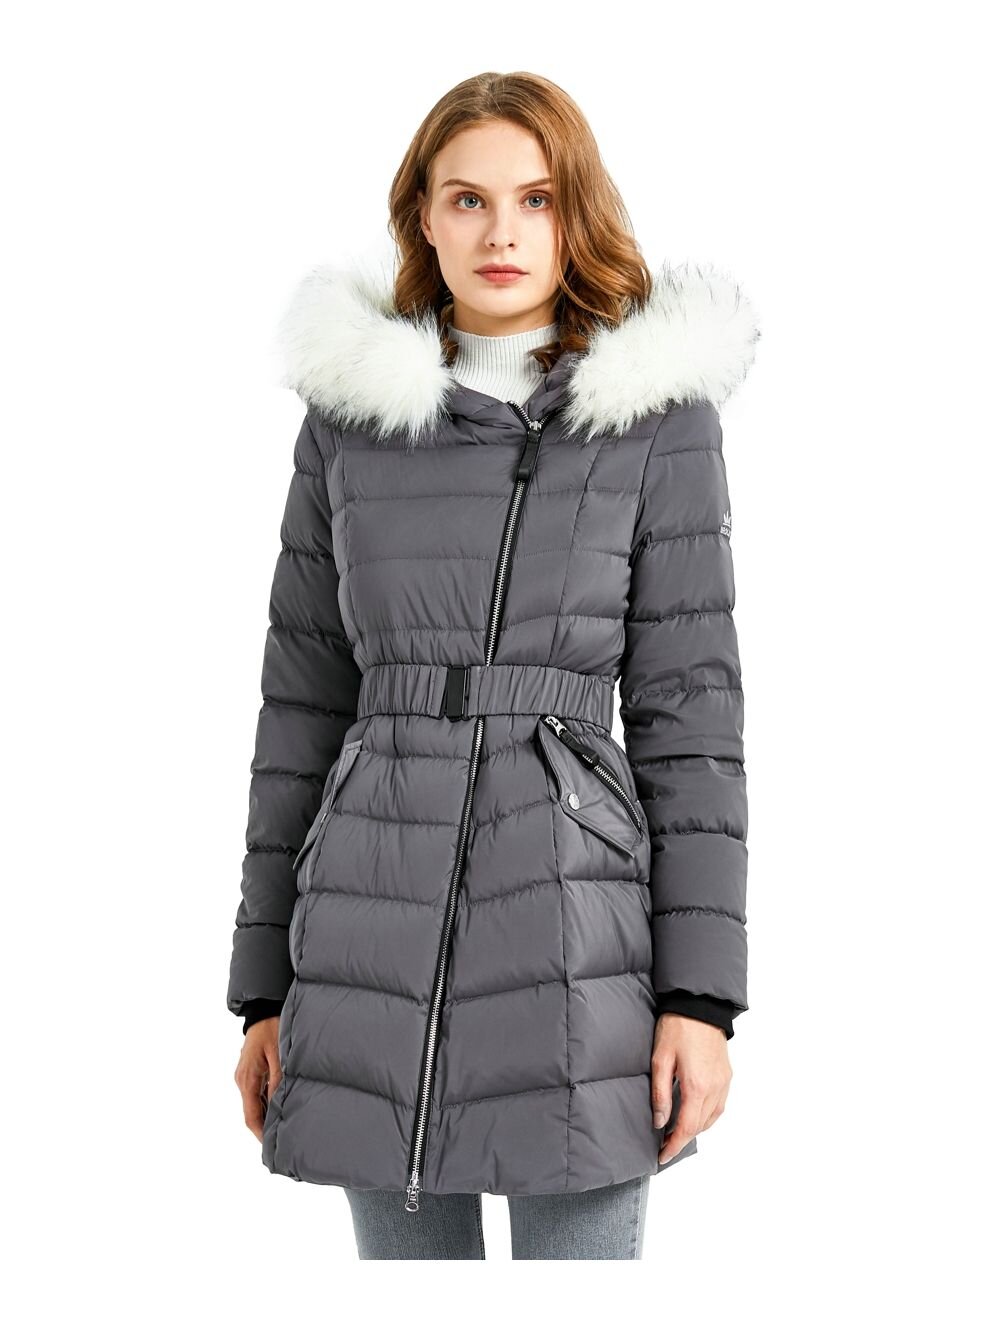 Orolay Hooded Down Jacket Women Winter Stand Collar Oblique Placket Puffer Coat